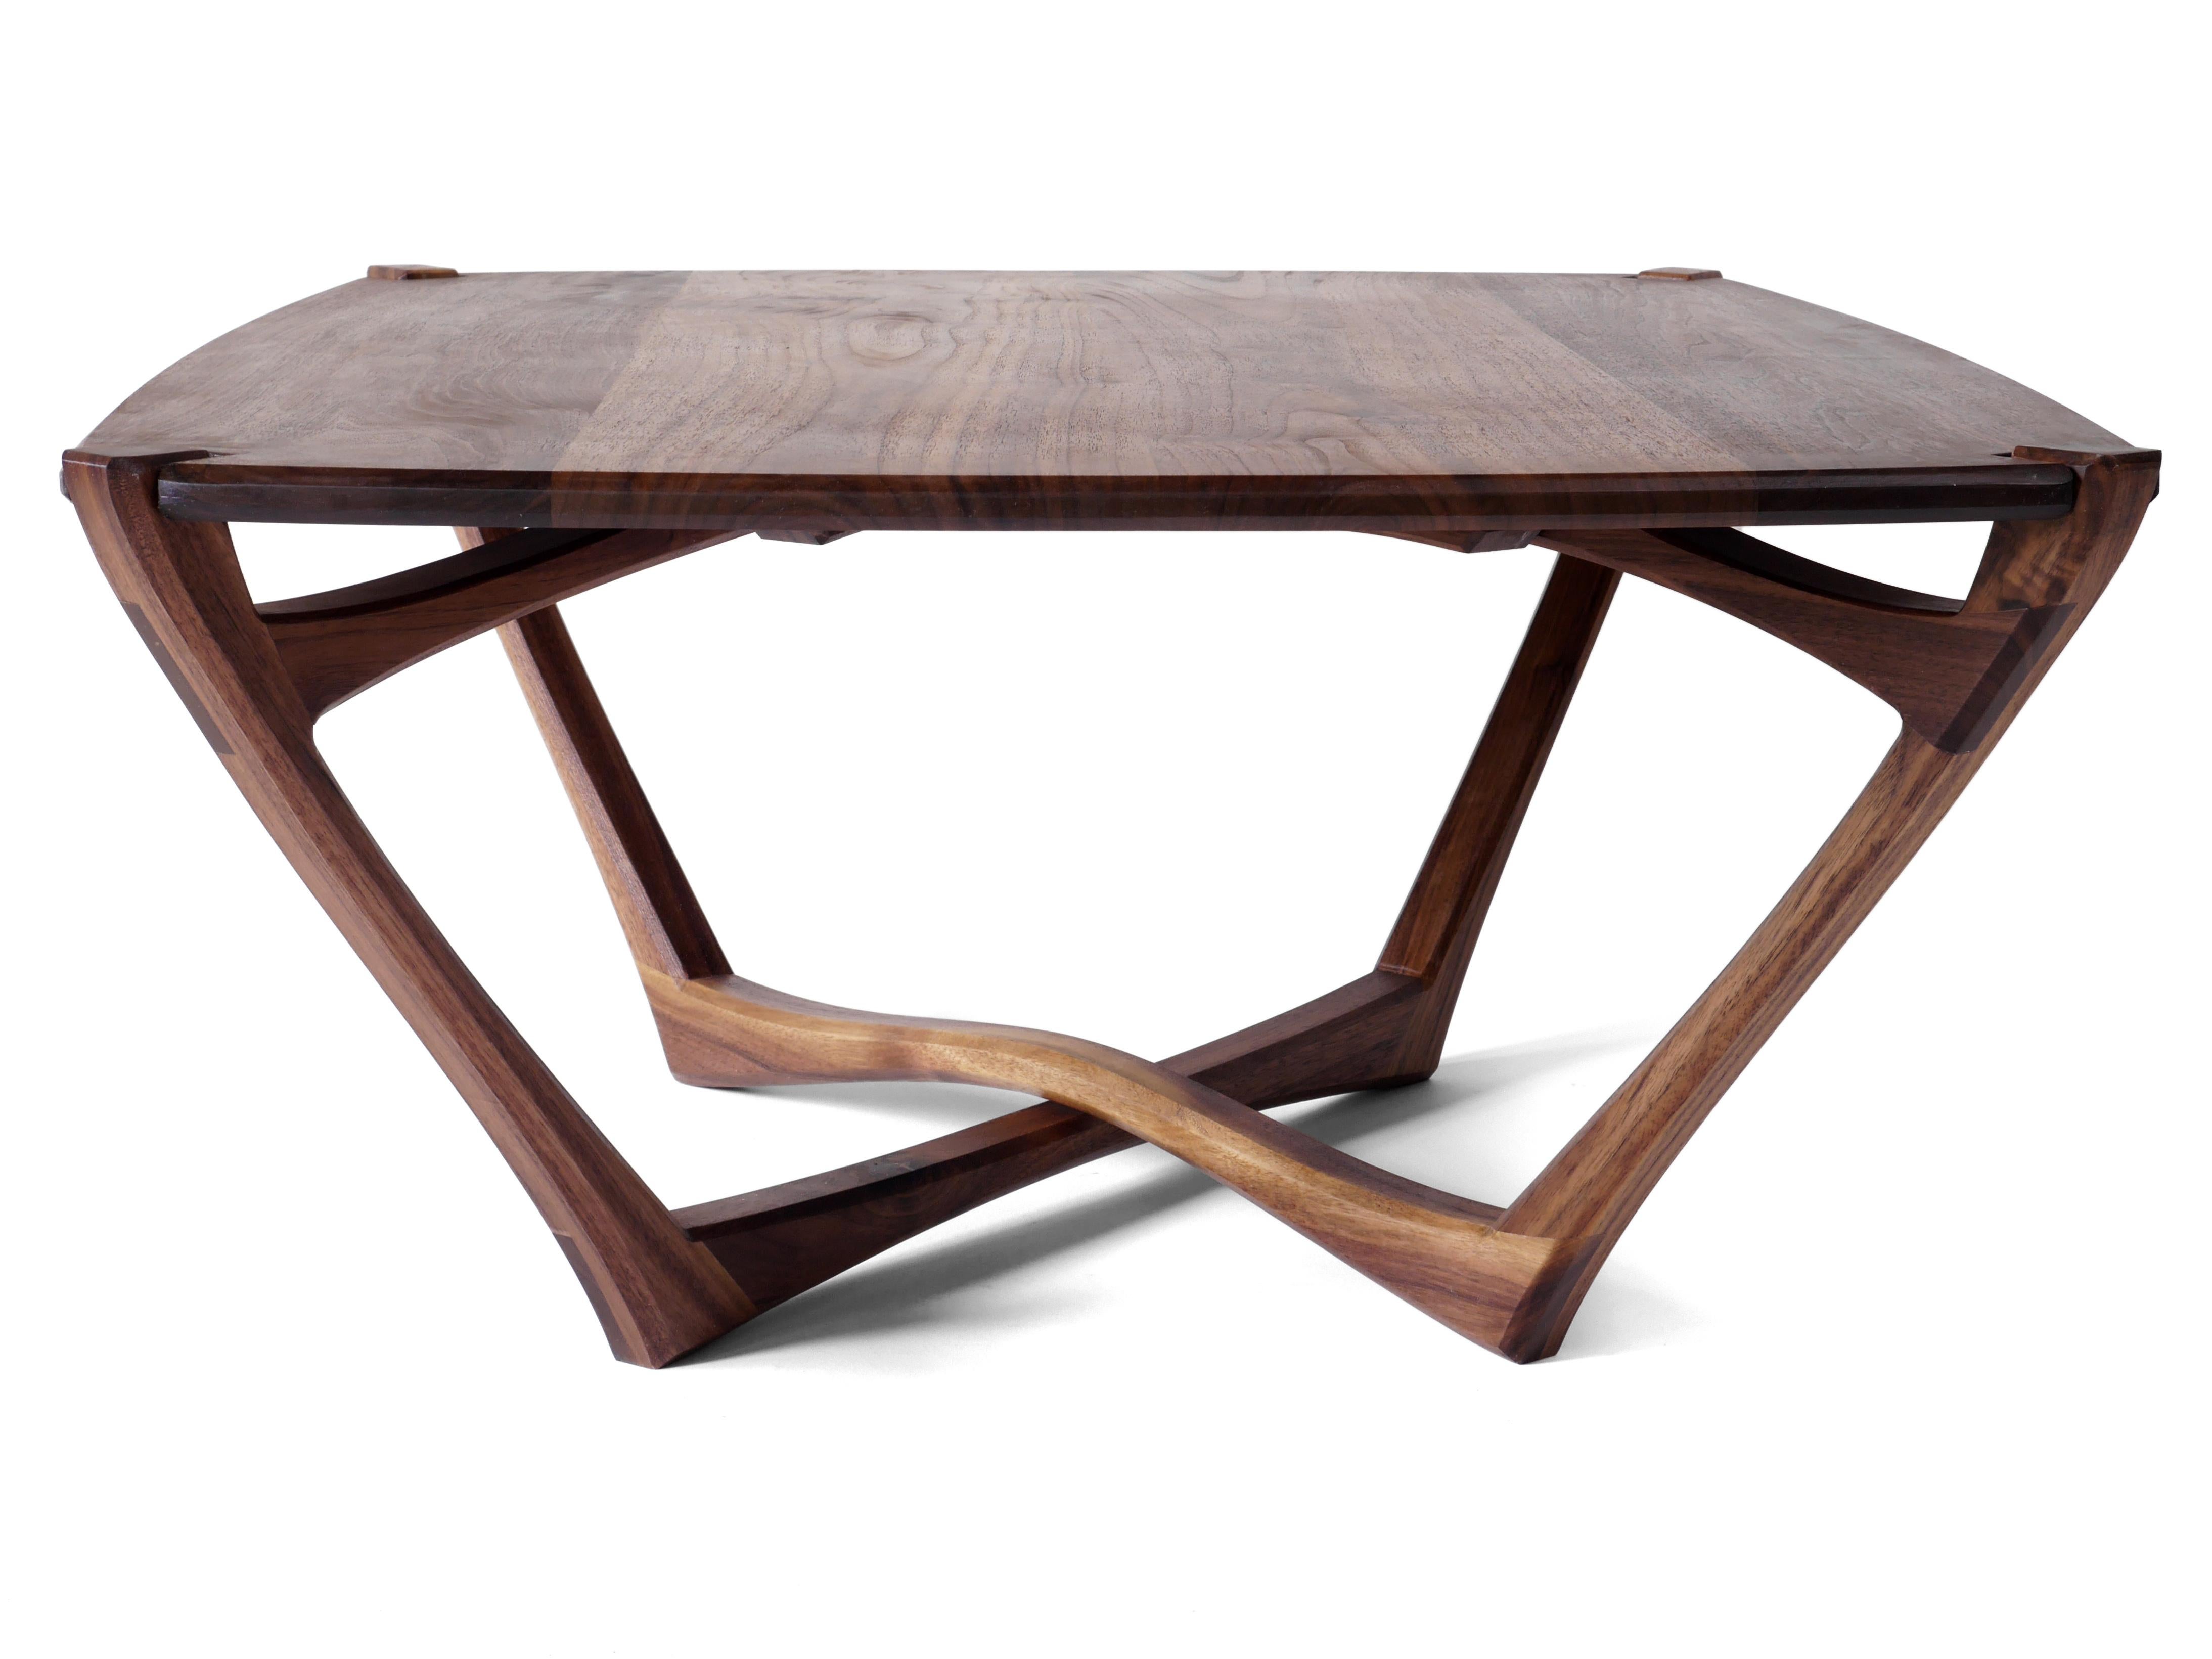 Hardwood Walnut Mistral Coffee Table, Modern Sculptural Living Room Table by Arid For Sale